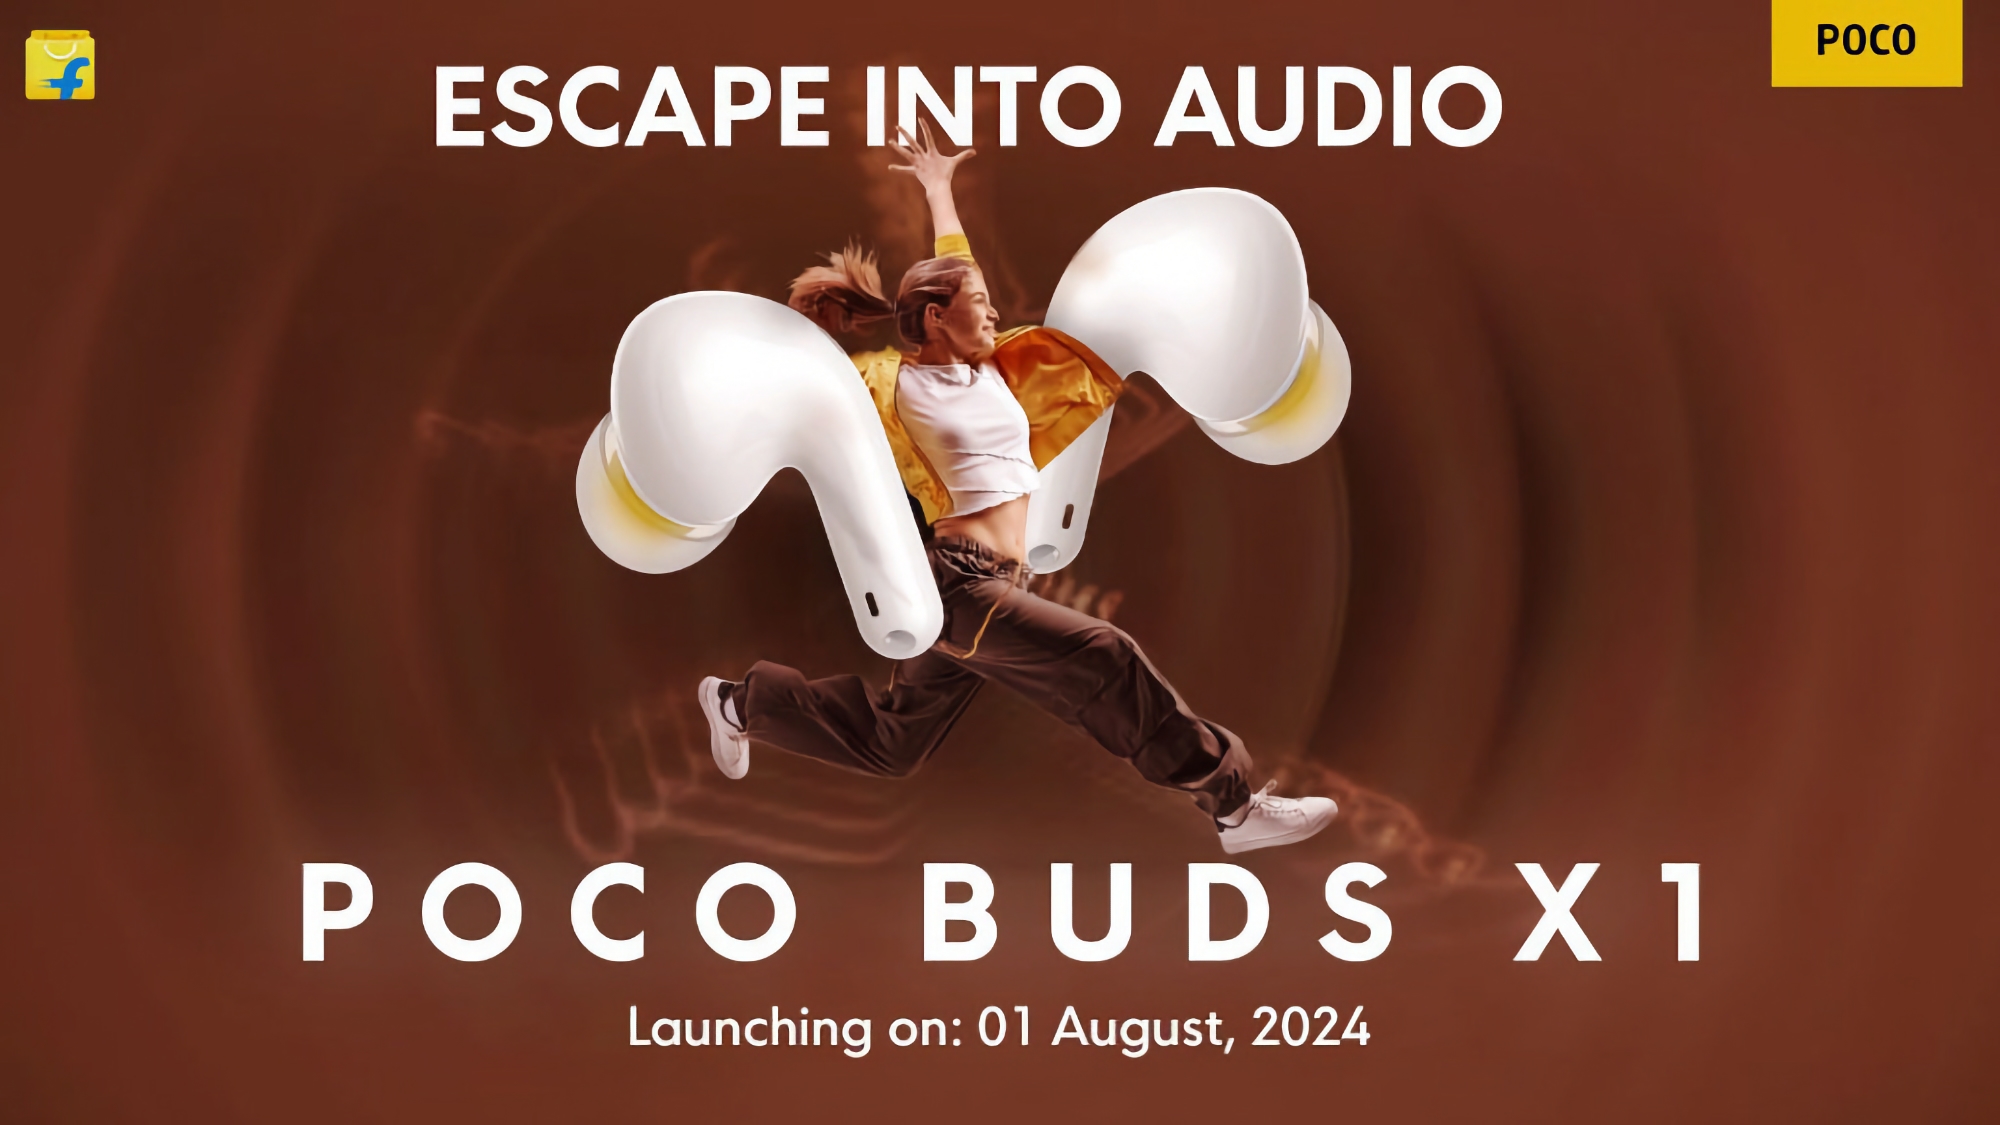 It's official: Xiaomi will unveil the POCO Buds X1 TWS headphones on 1 August